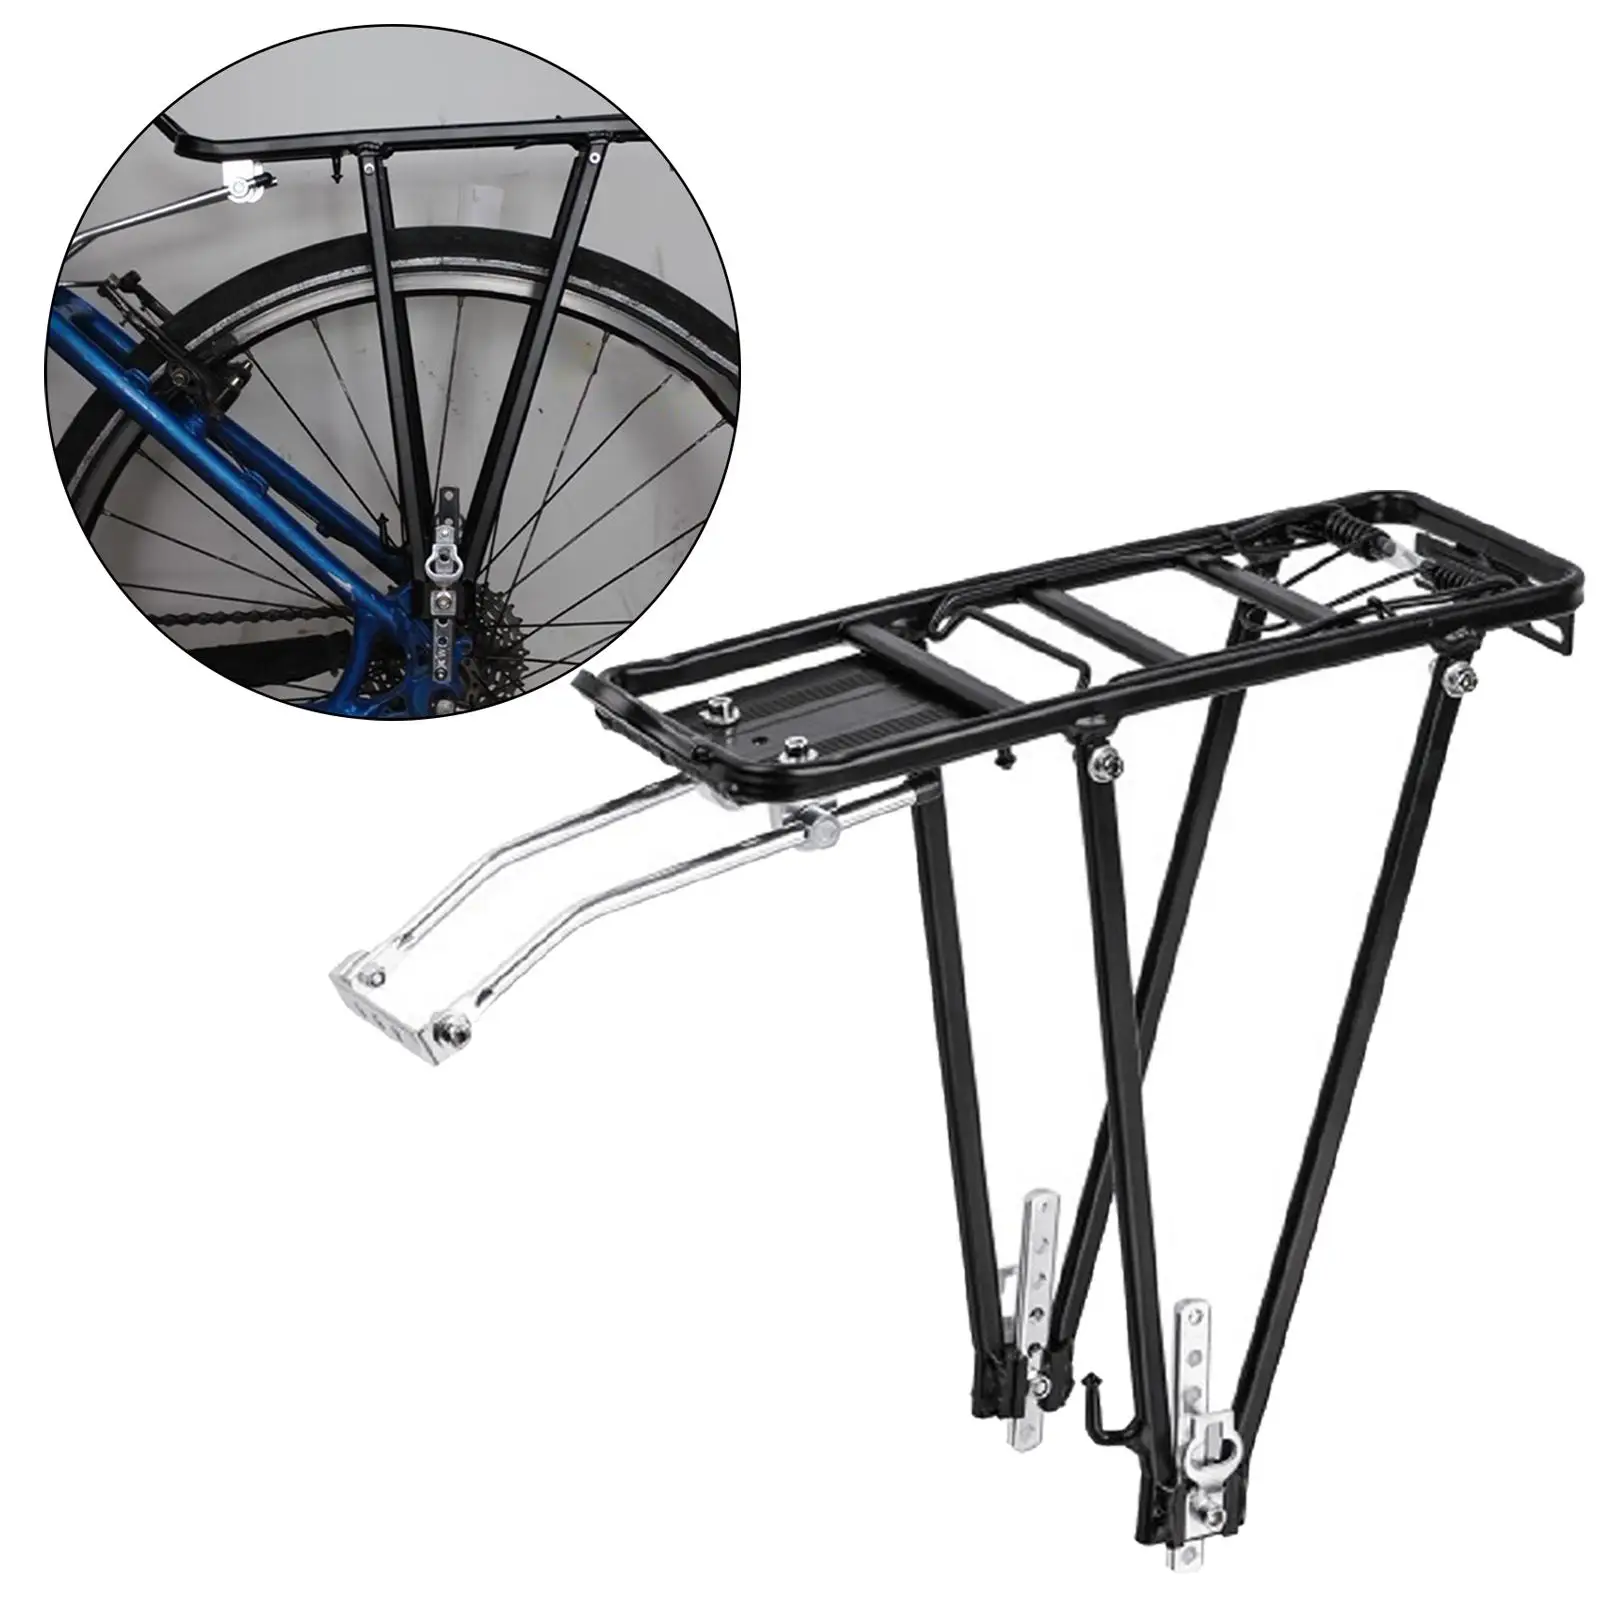 Rear Bicycle Bike Rack Luggage Carrier Shelf Rear Seat Post Rack Frame Bracket for Easy to Install